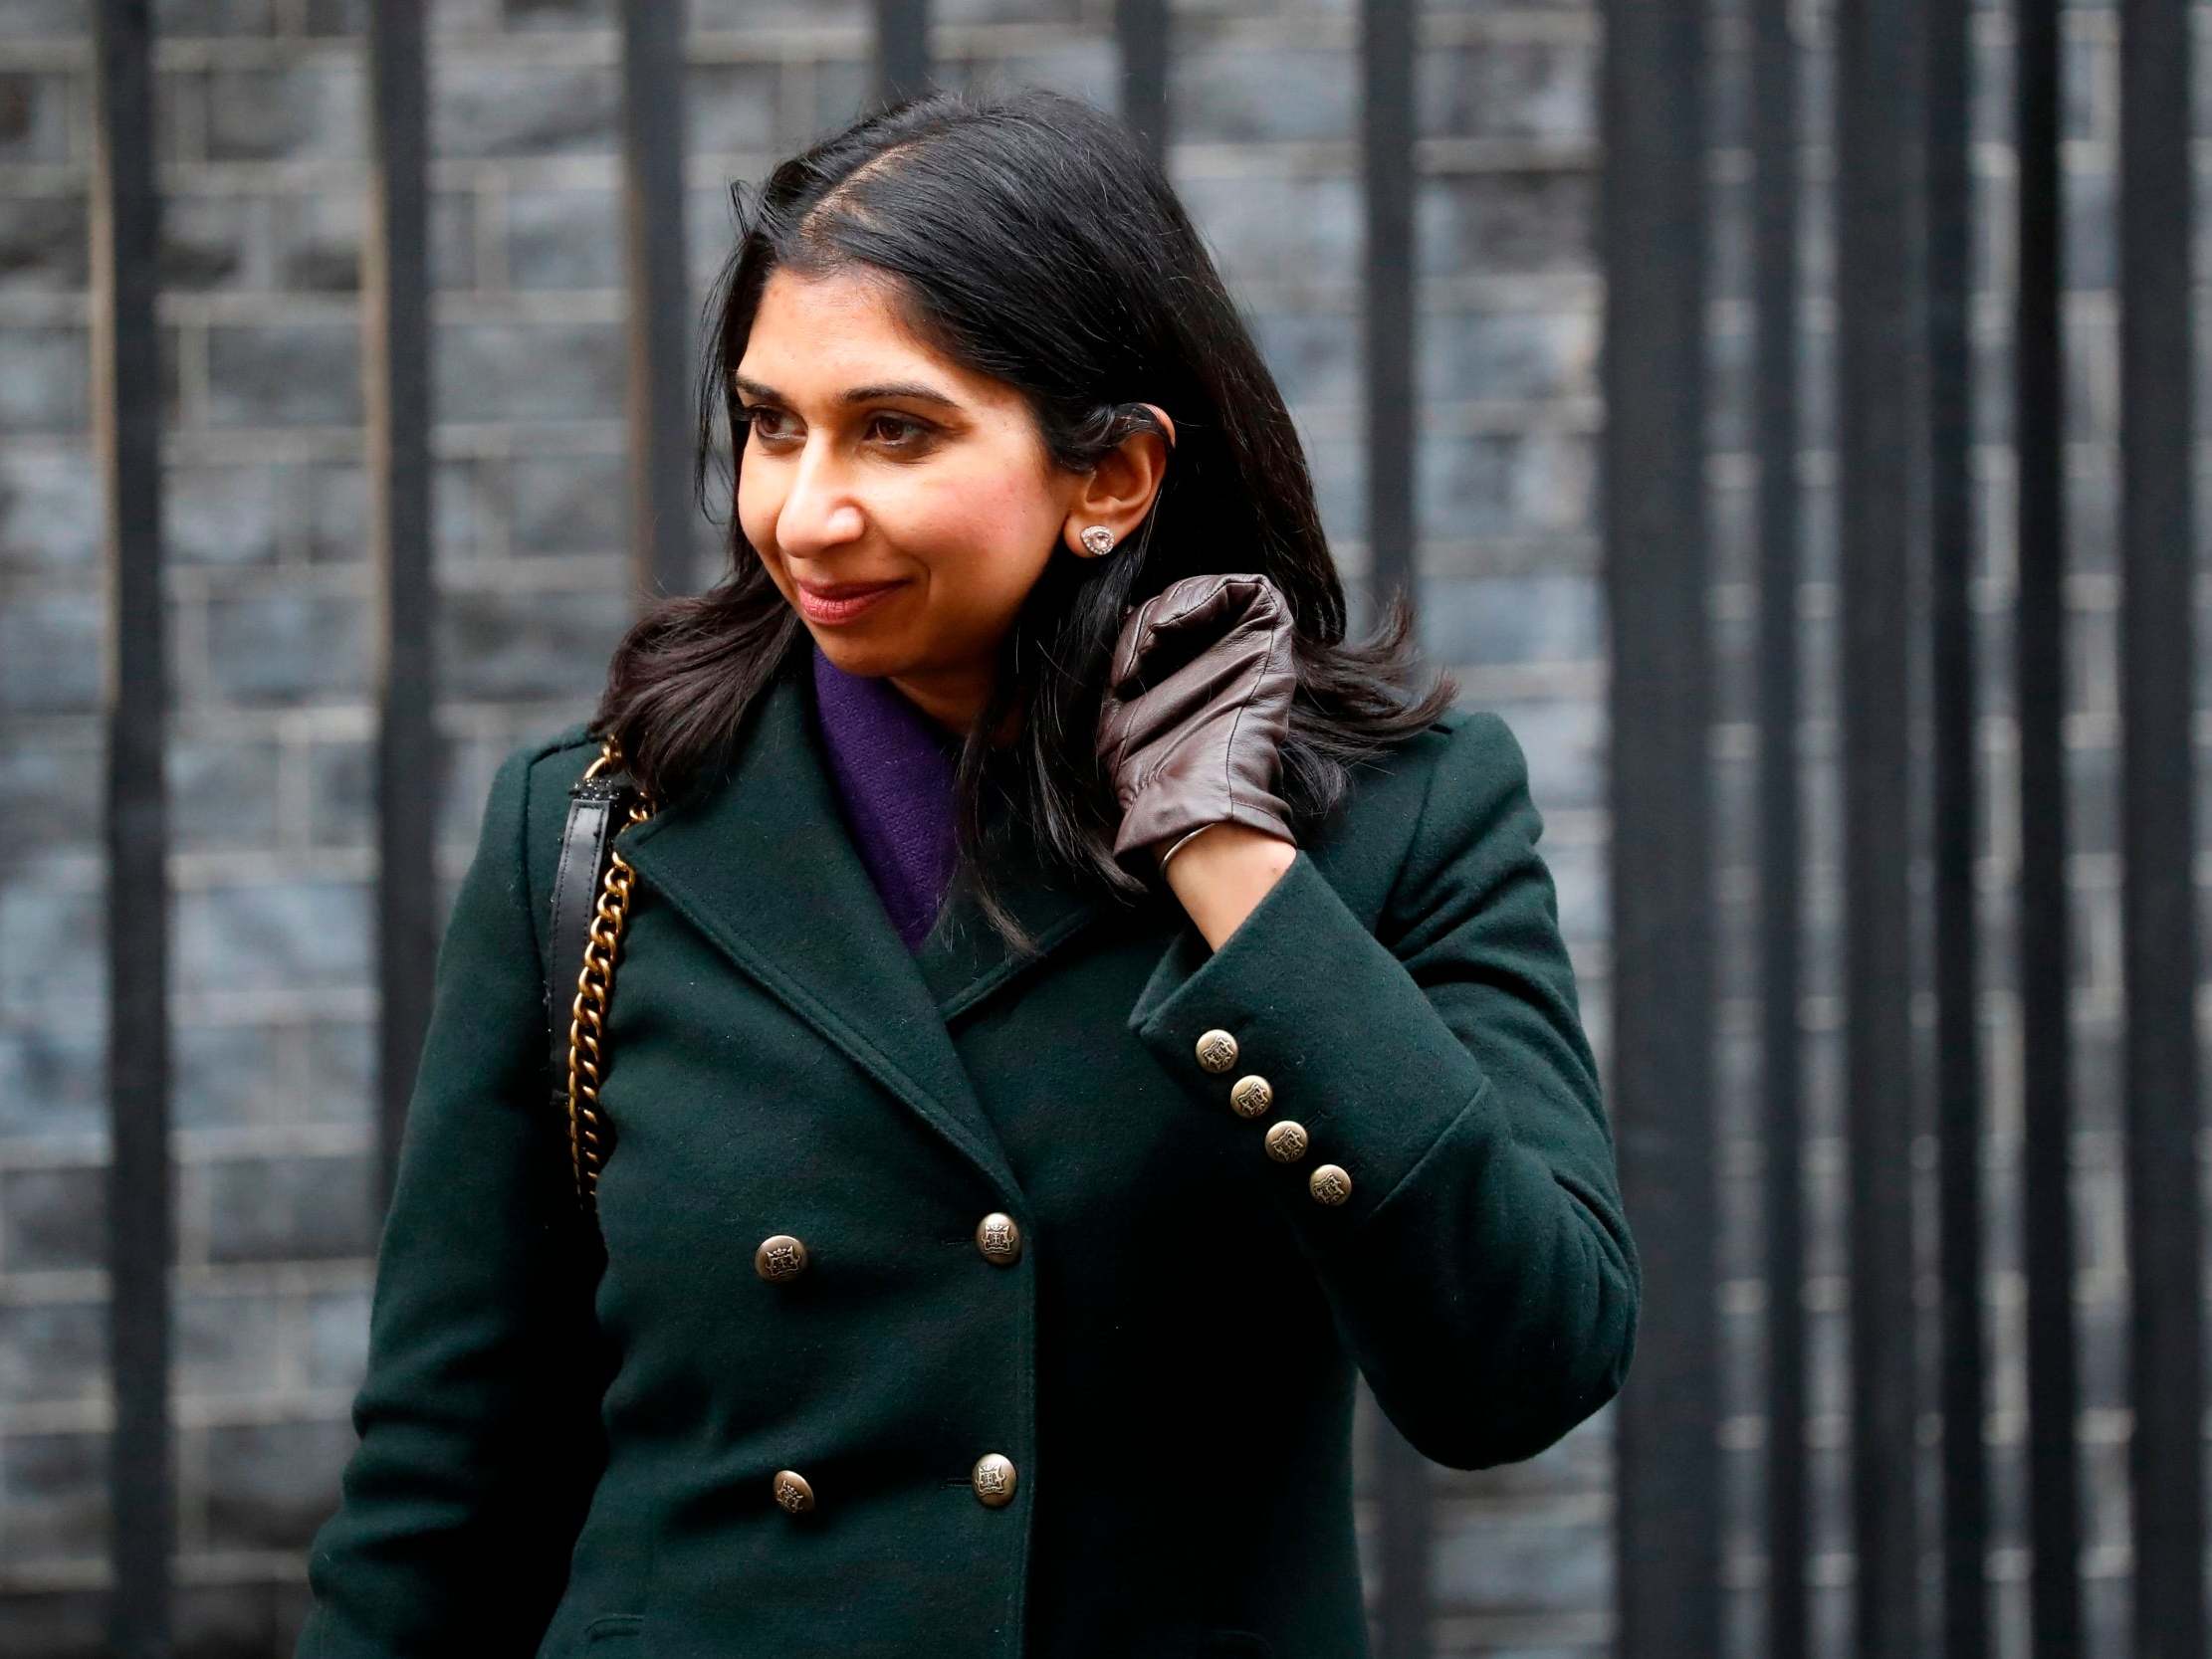 Suella Braverman will have fewer qualms about clipping the judiciary’s wings than her predecessor Geoffrey Cox